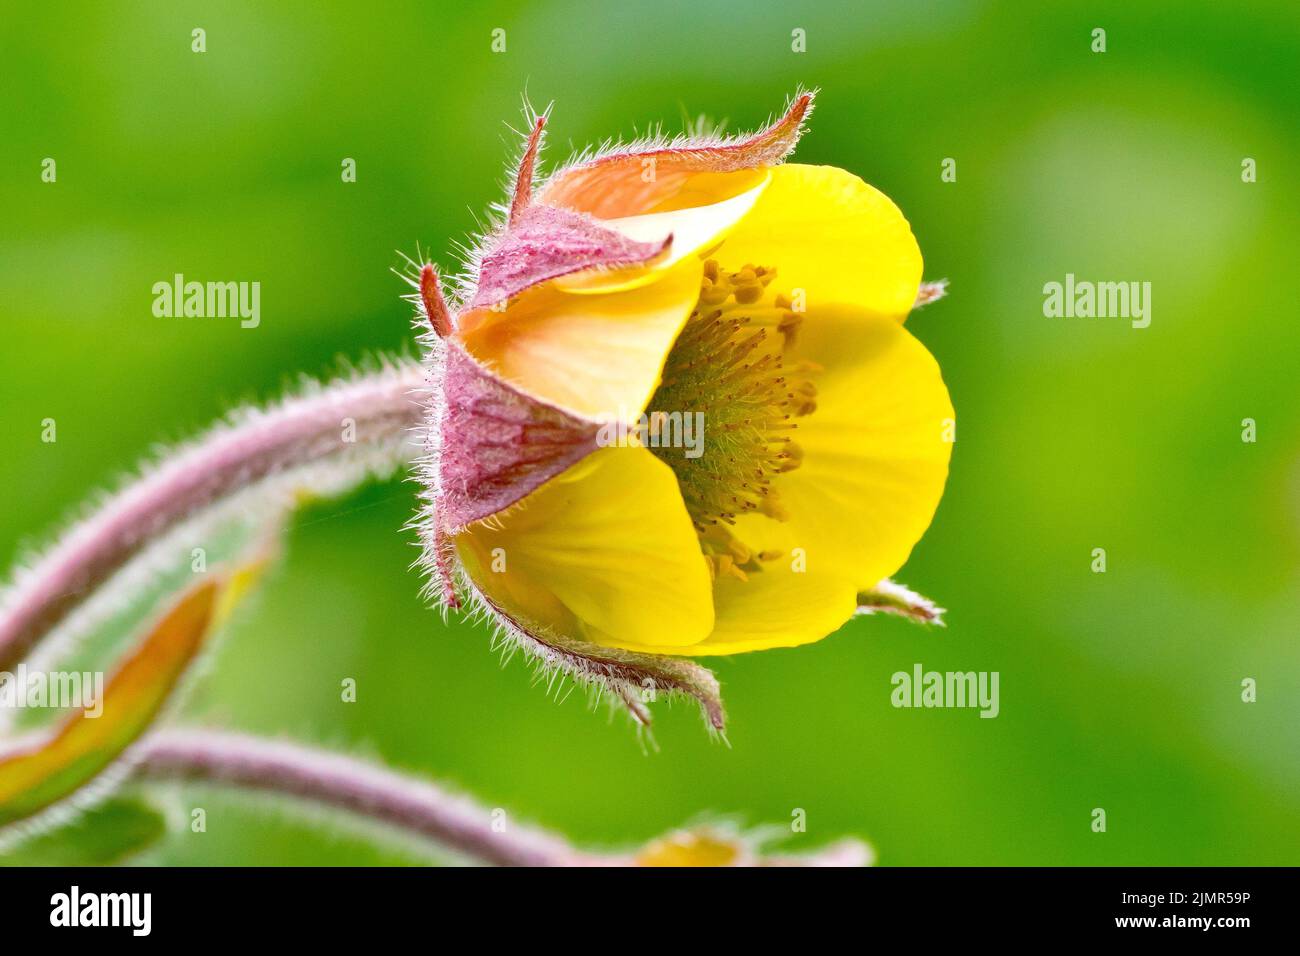 Close up of the hybrid flower of Water Avens or Billy's Button (geum rivale) and Wood Avens or Herb Bennet (geum urbanum), (geum x intermedium). Stock Photo